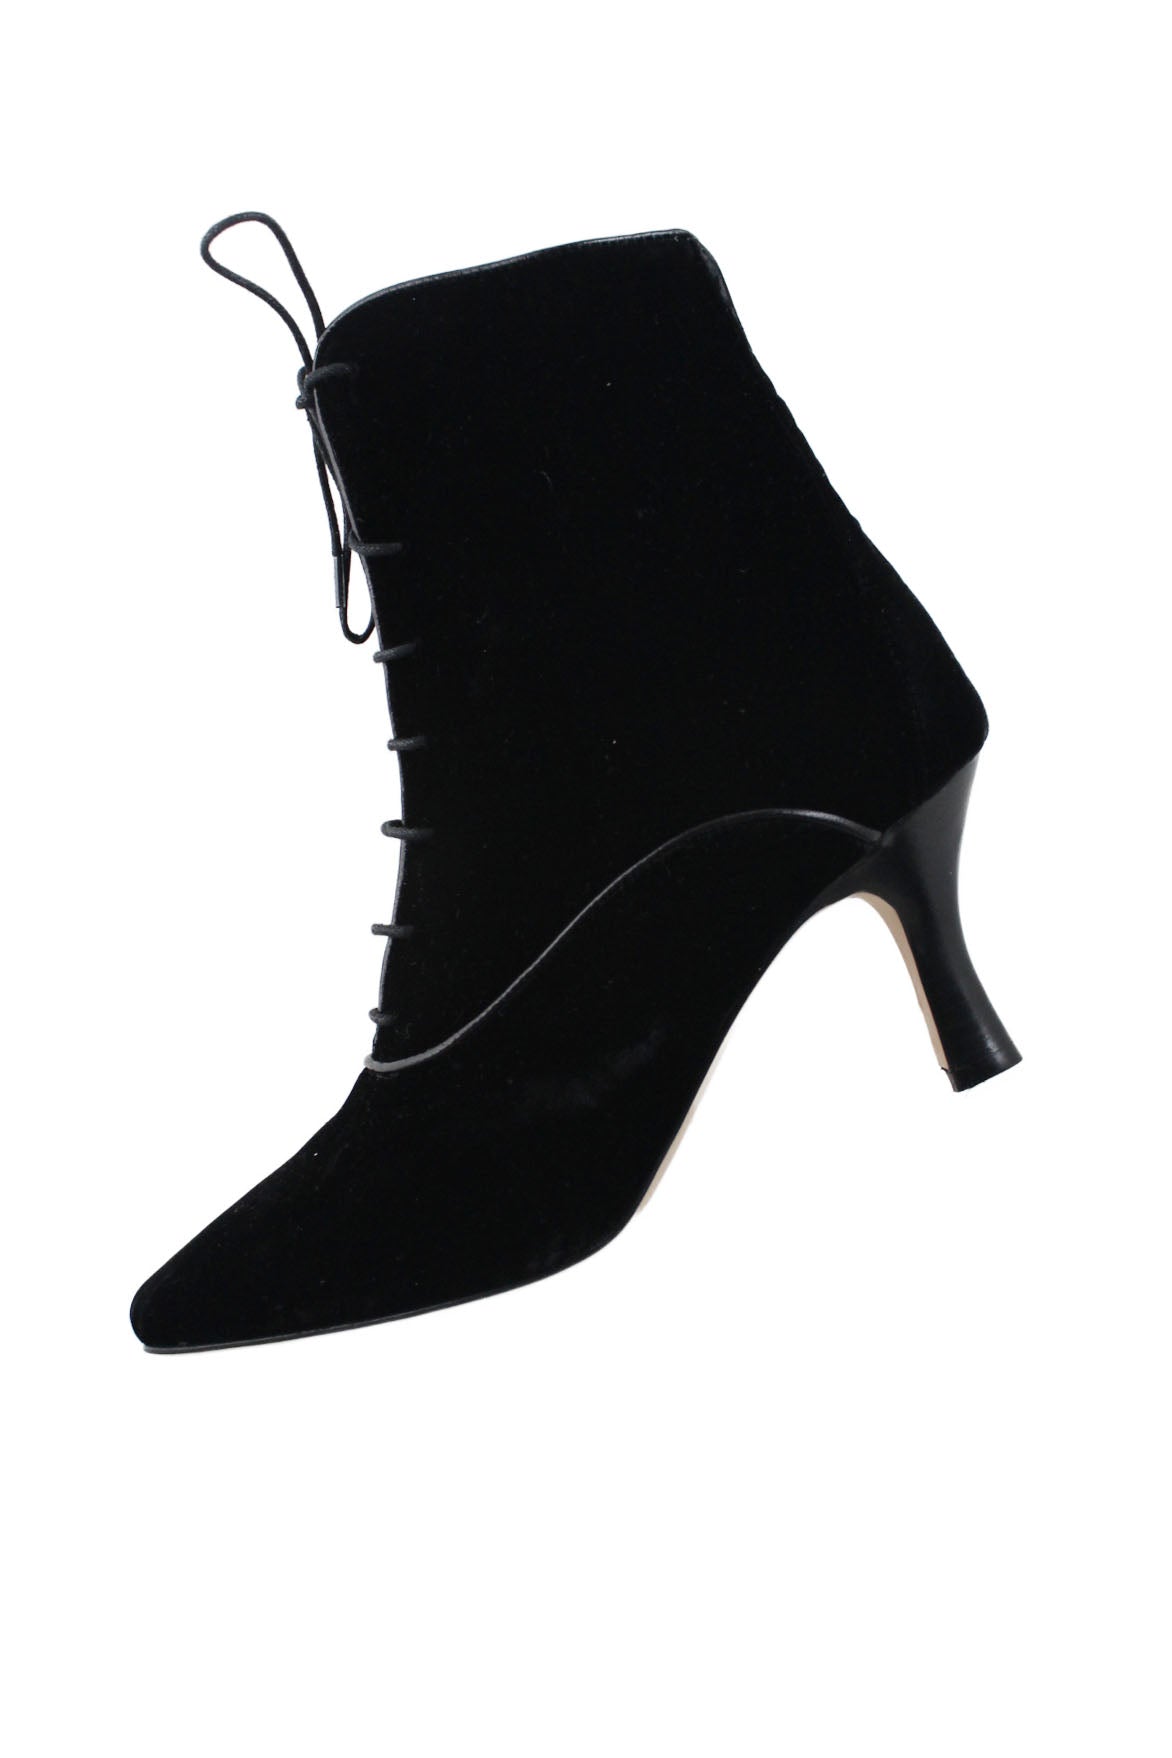 profile of doen black velvet ankle boots. features almond-shaped toe, a slim mid-height heel, leather trim, and lace up closure. 